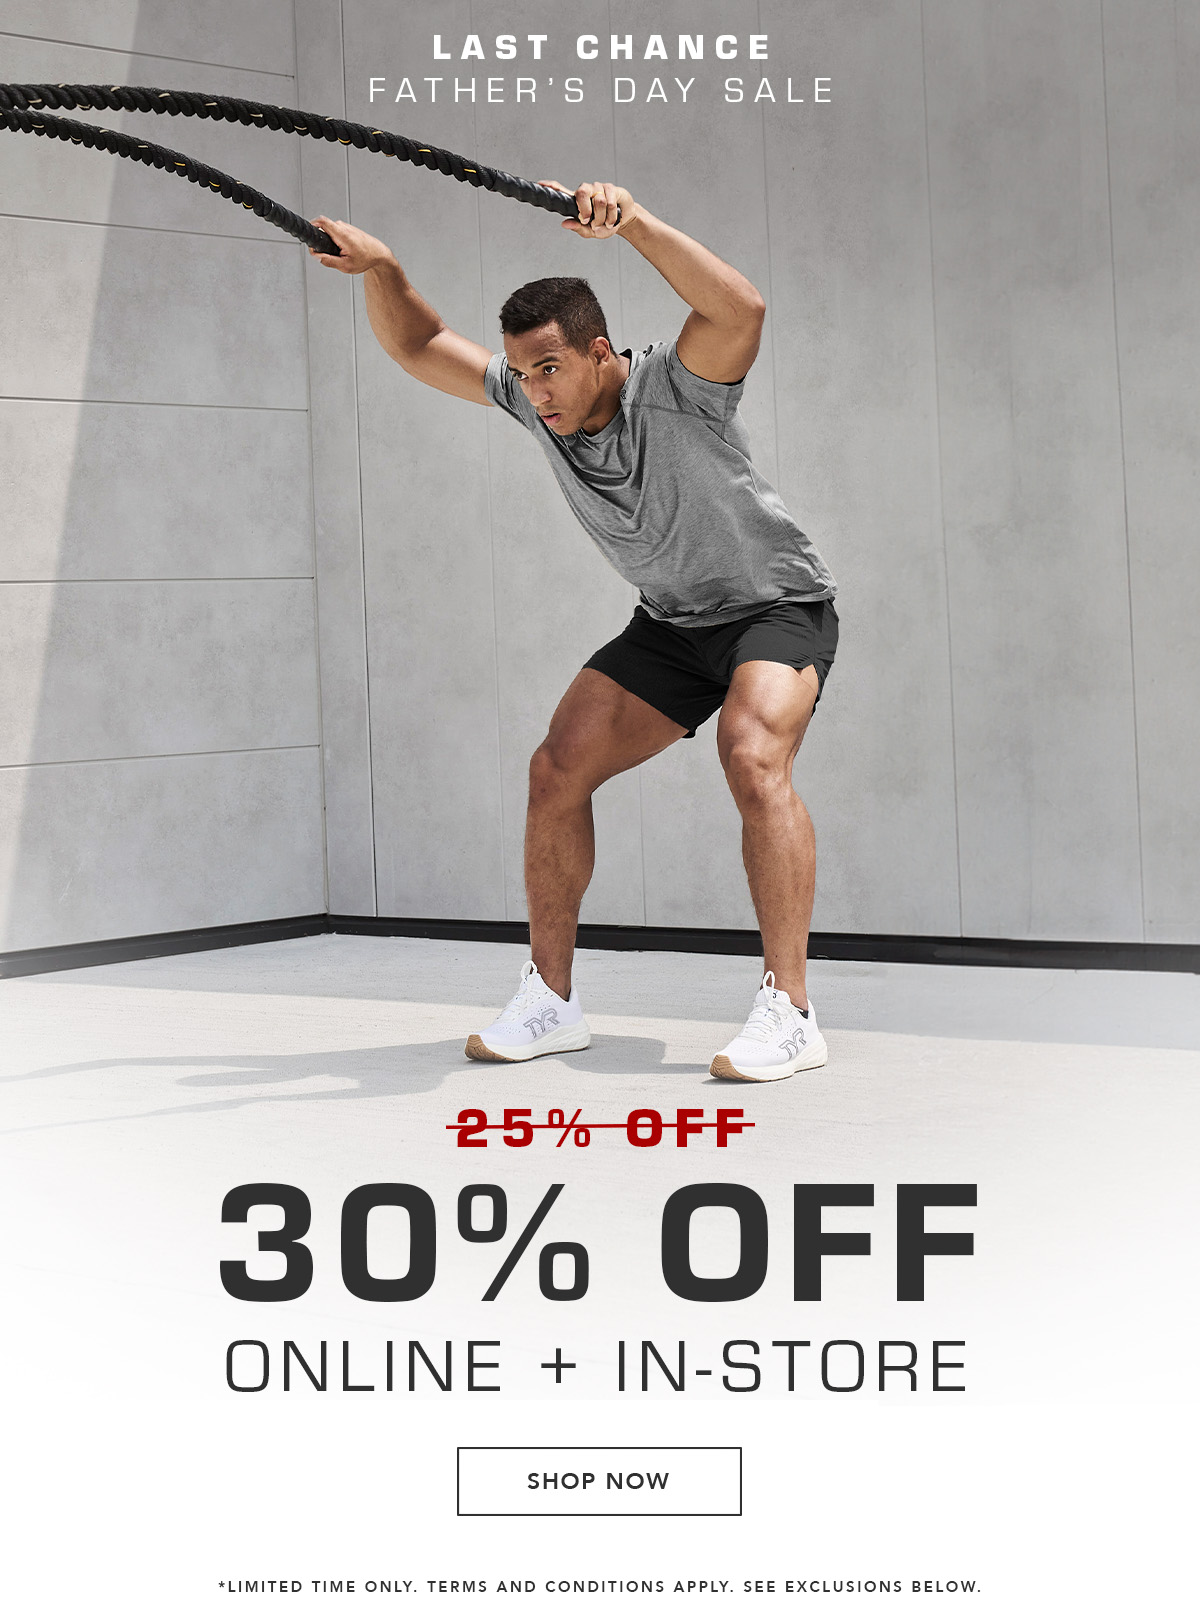 Last chance for 30% off sitewide